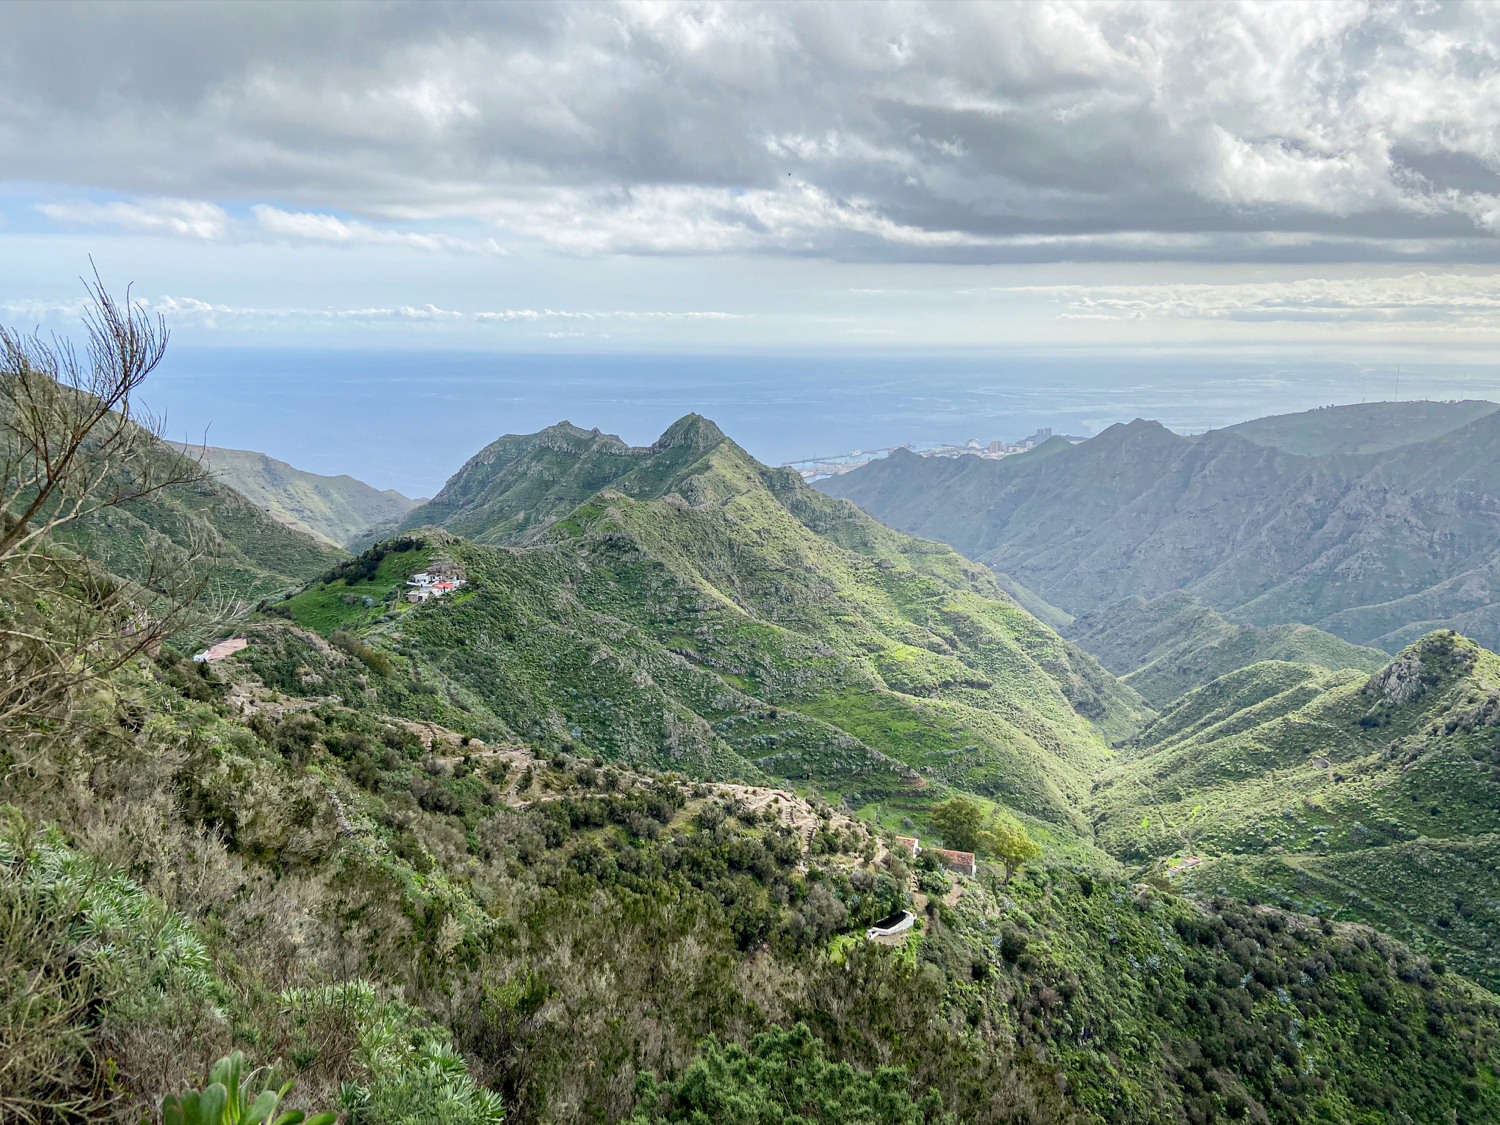 View from Los Berros to the Fortaleza and the Barranco de Valle Luis